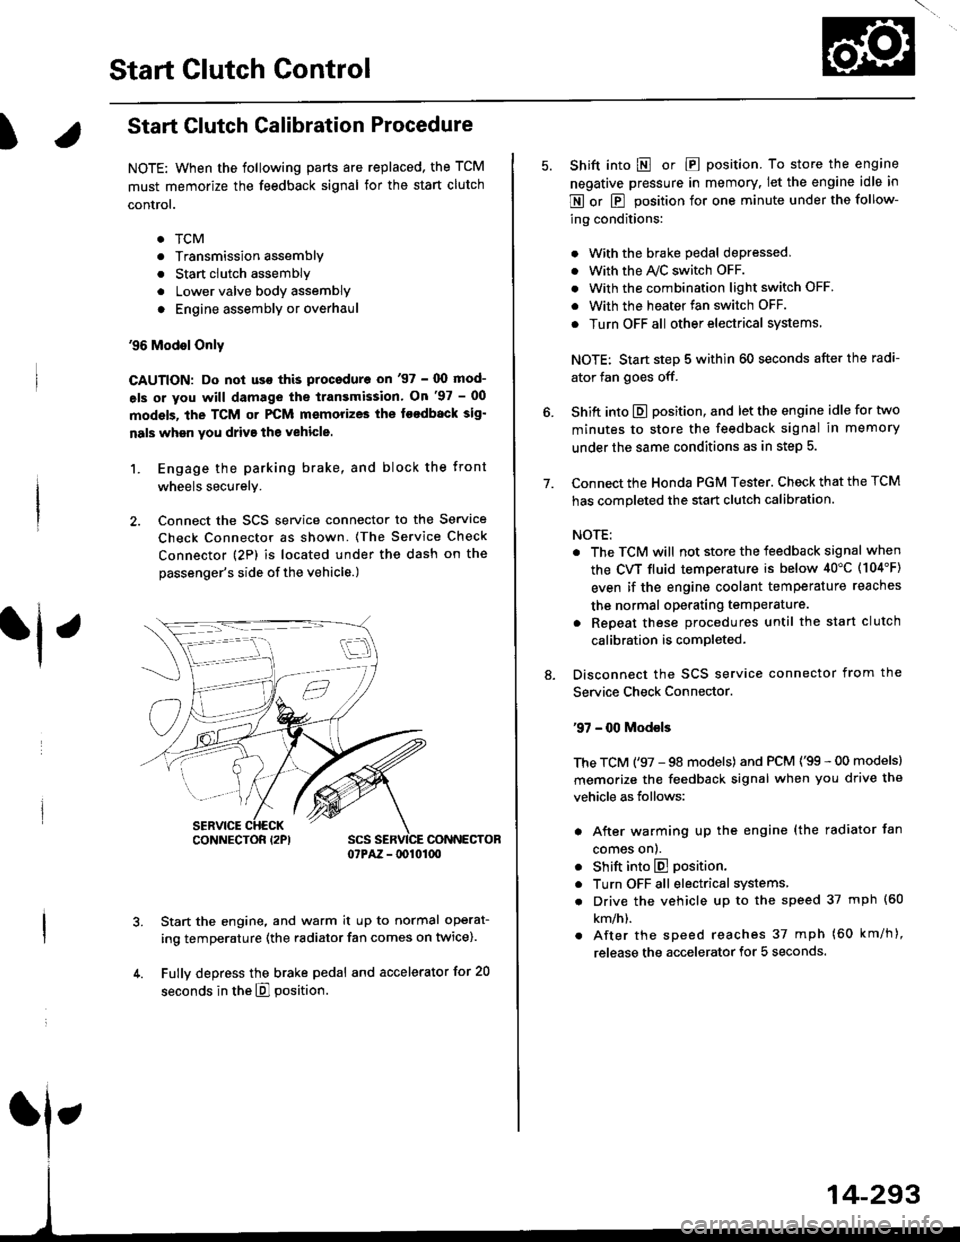 HONDA CIVIC 2000 6.G Owners Guide Start Clutch Control@
T
Start Clutch Calibration Procedure
NOTE: When the following parts are replaced, the TCM
must memorize the feedback signal for the start clutch
control.
. TCM
. Transmissionasse